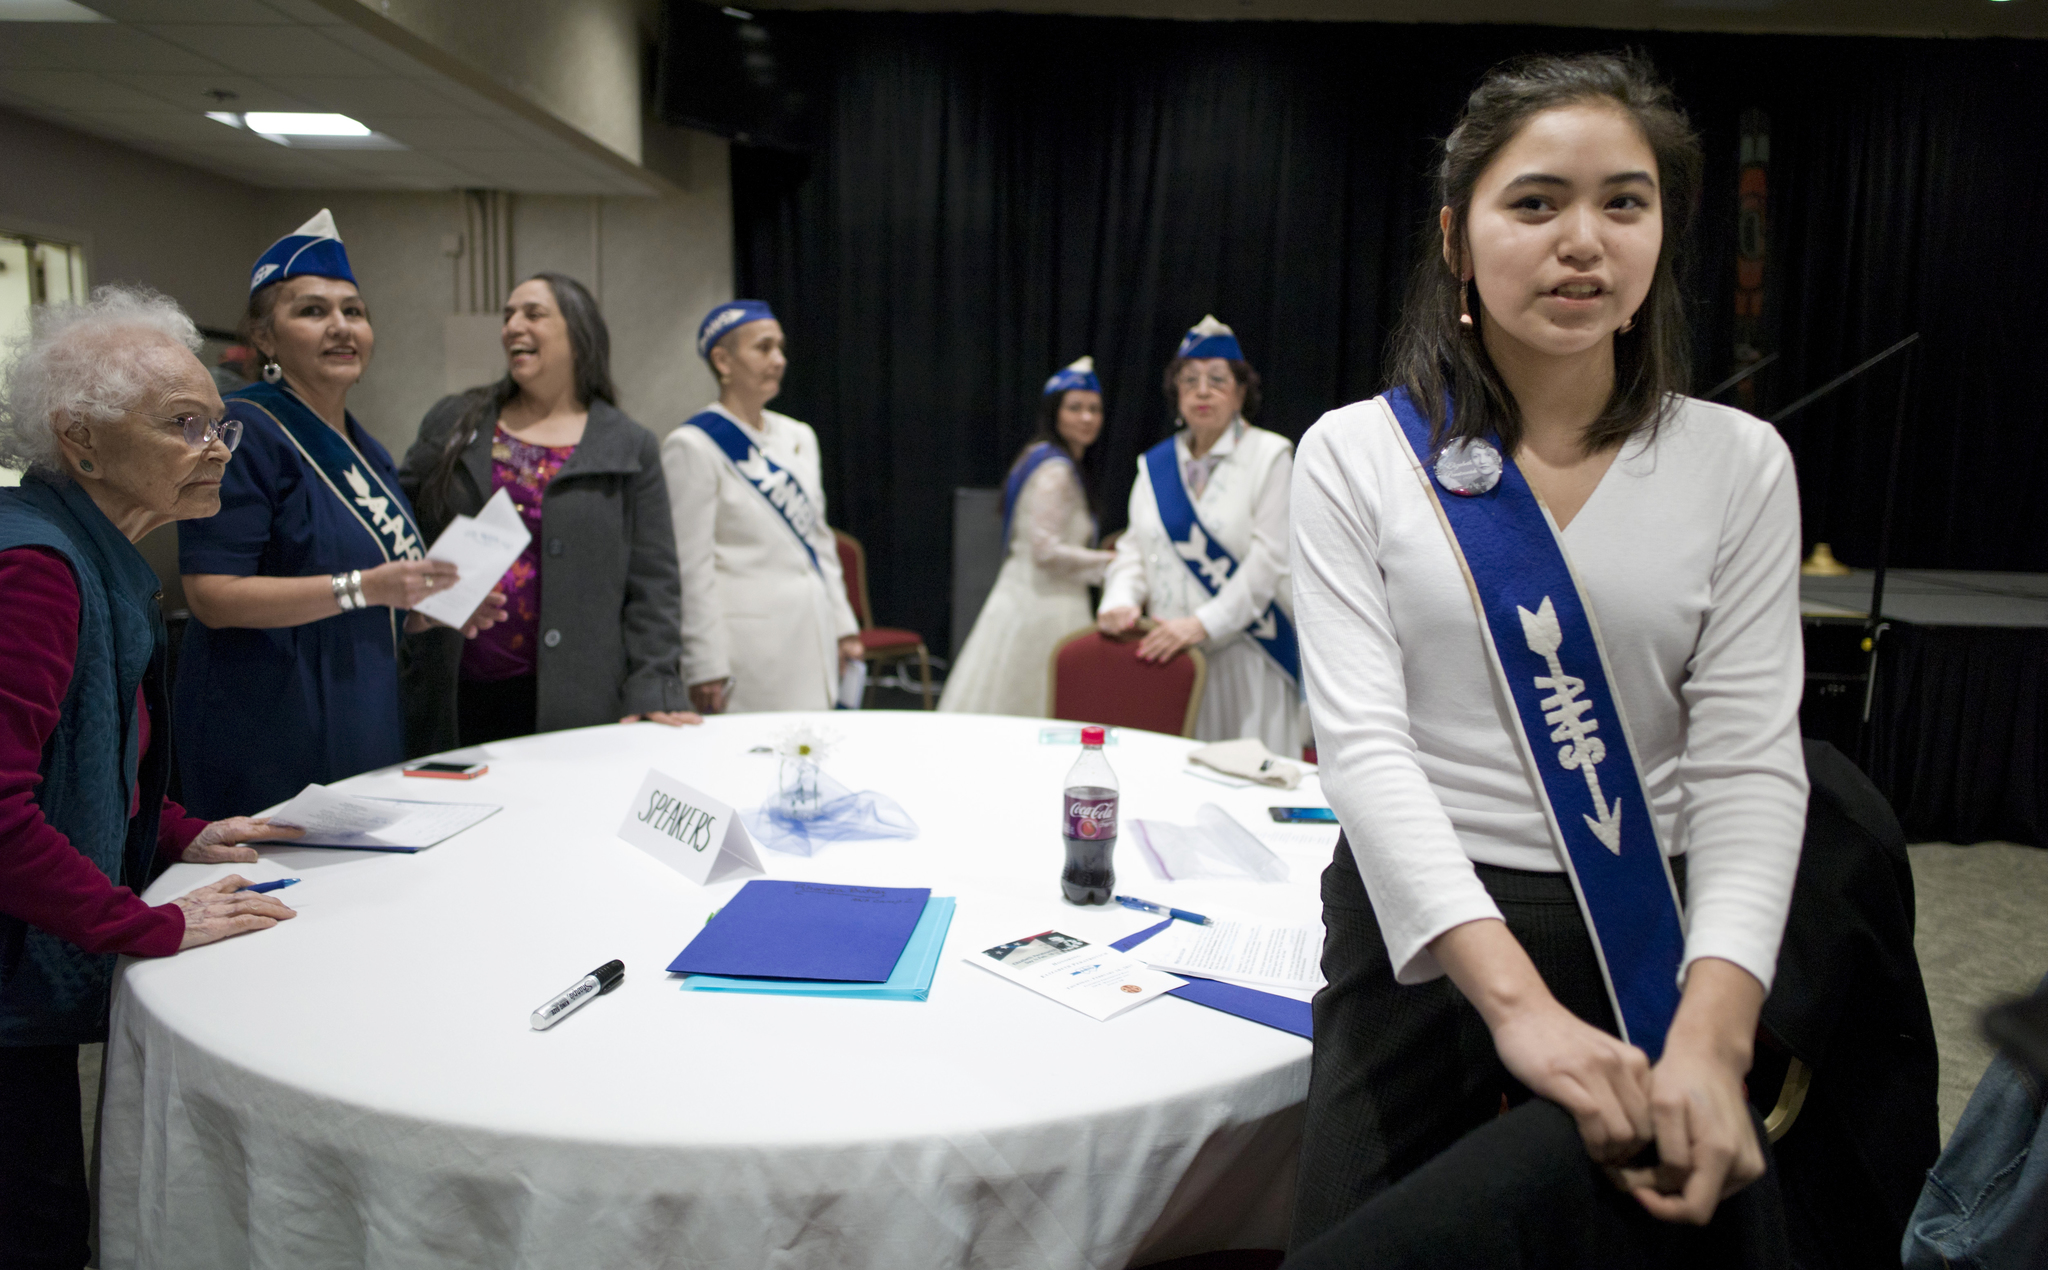 Alayna Duncan, 14, is the youngest elected offical in the Alaska Native Sisterhood attending the Elizabeth Peratrovich Day ceremony in the Elizabeth Peratrovich Hall on Thursday. (Michael Penn | Juneau Empire)